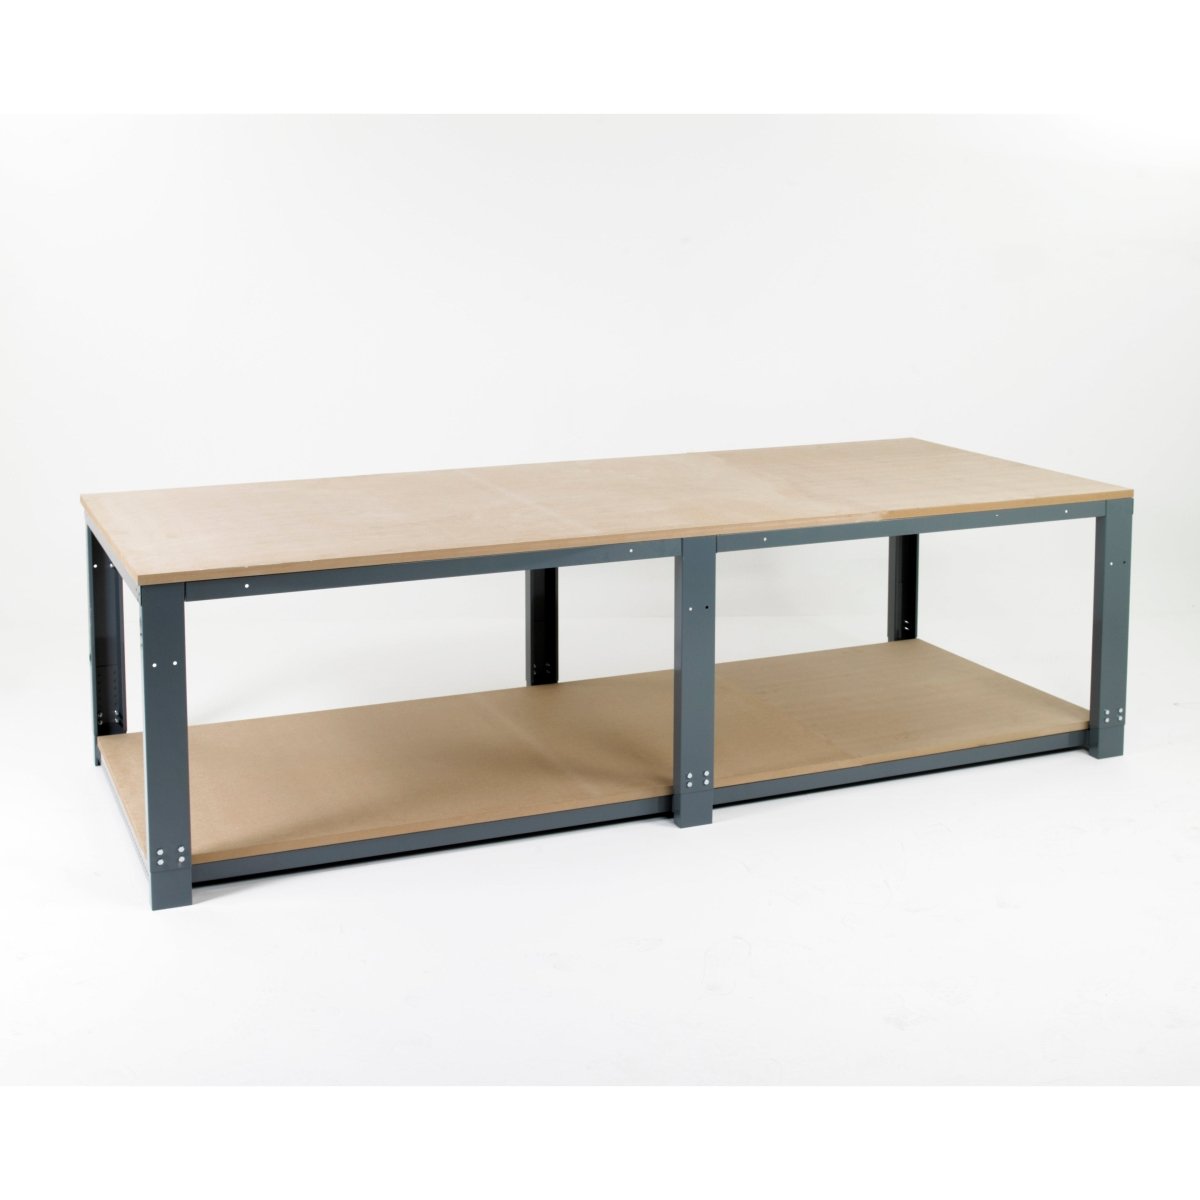 Complete Modular Work Bench With Base Shelf 1000Kg Capacity - Warehouse Storage Products